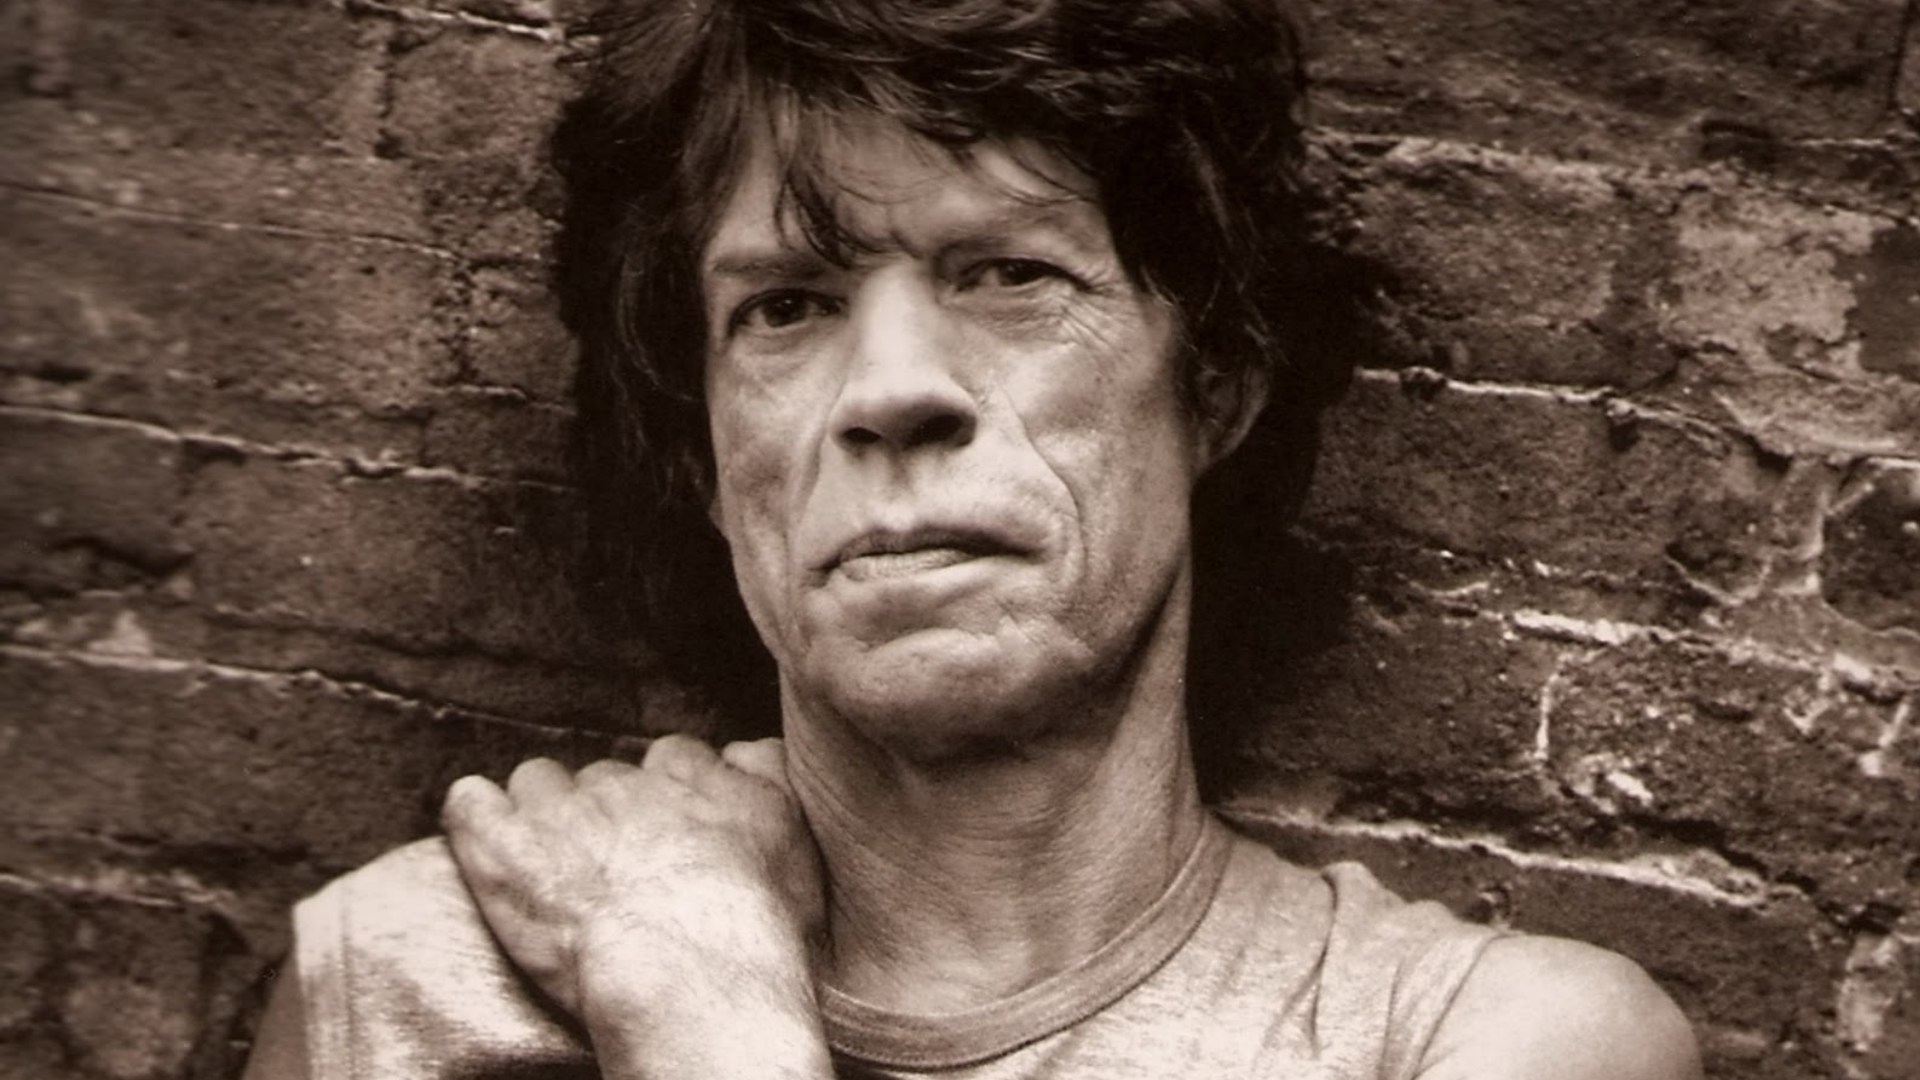 music, the rolling stones, mick jagger